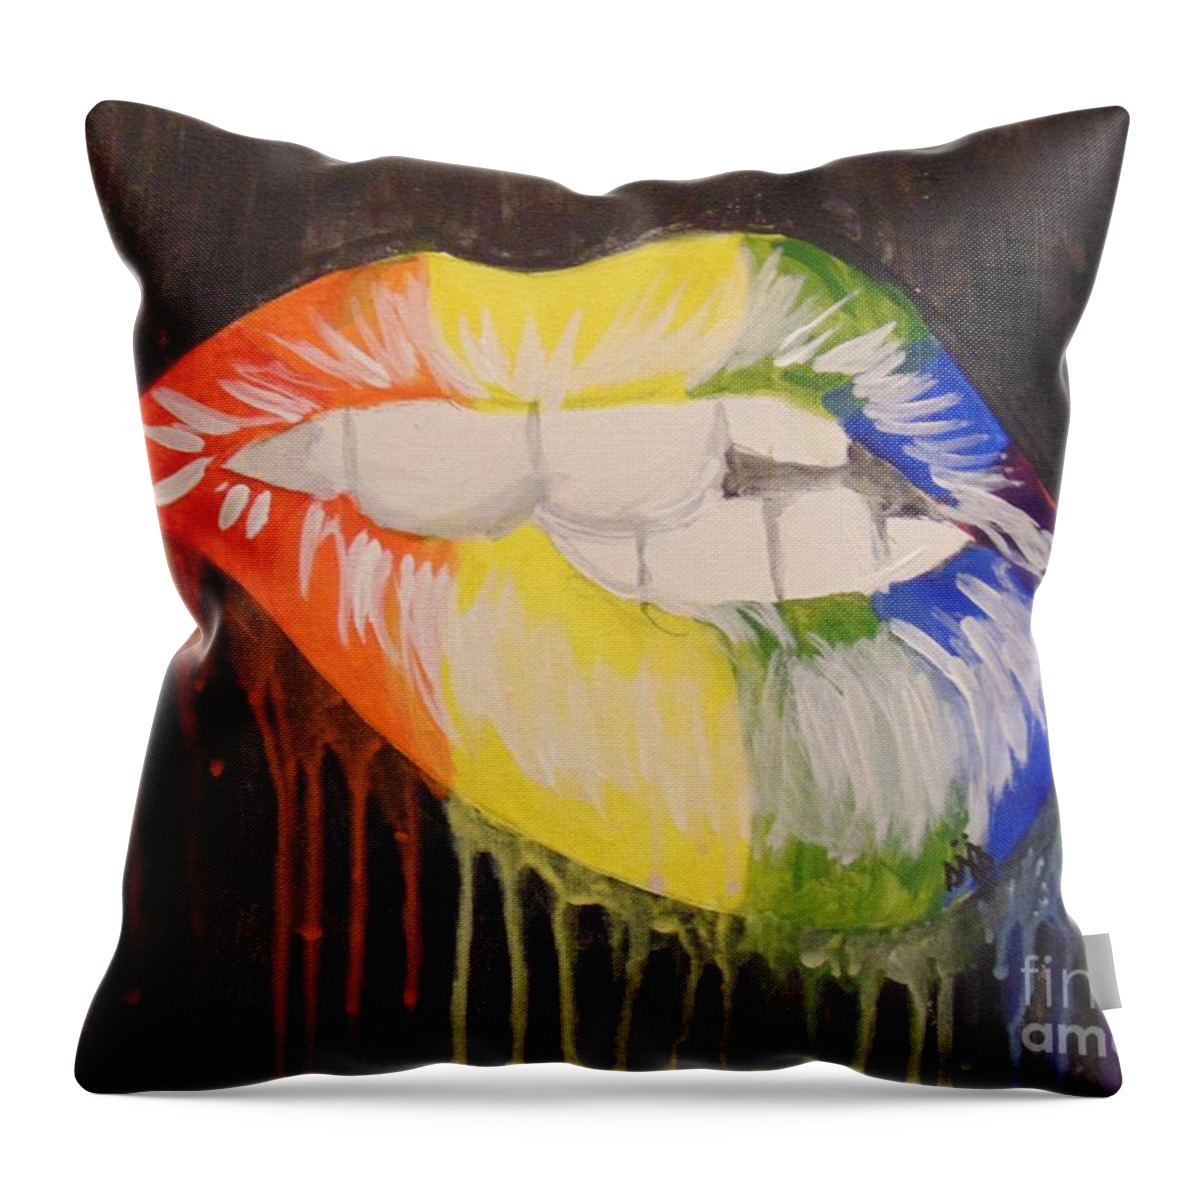 Black Canvas Throw Pillow featuring the painting Hopeful by Saundra Johnson